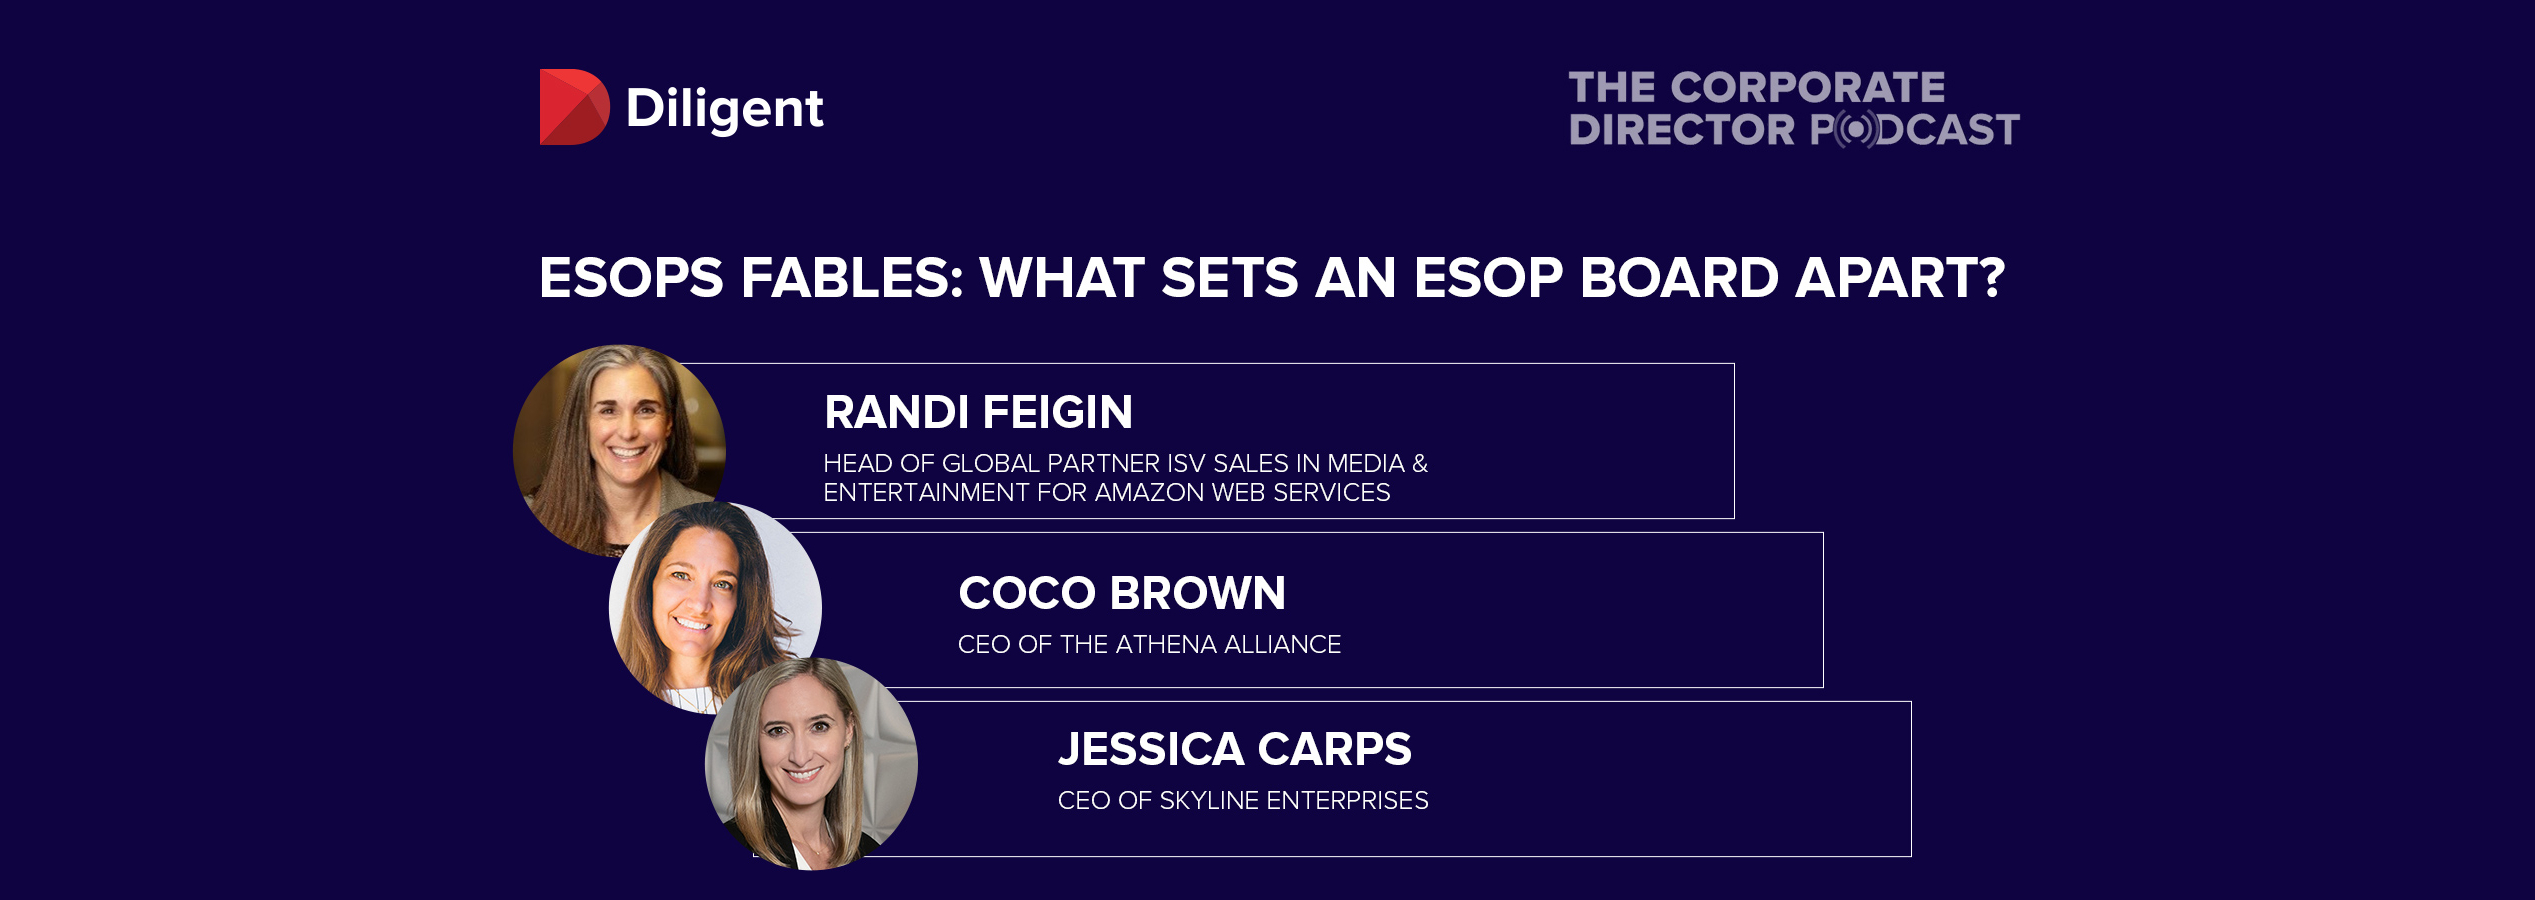 The Corporate Director Podcast, Episode 85 Cover. ESOPS Fables, What sets an ESOP board apart?